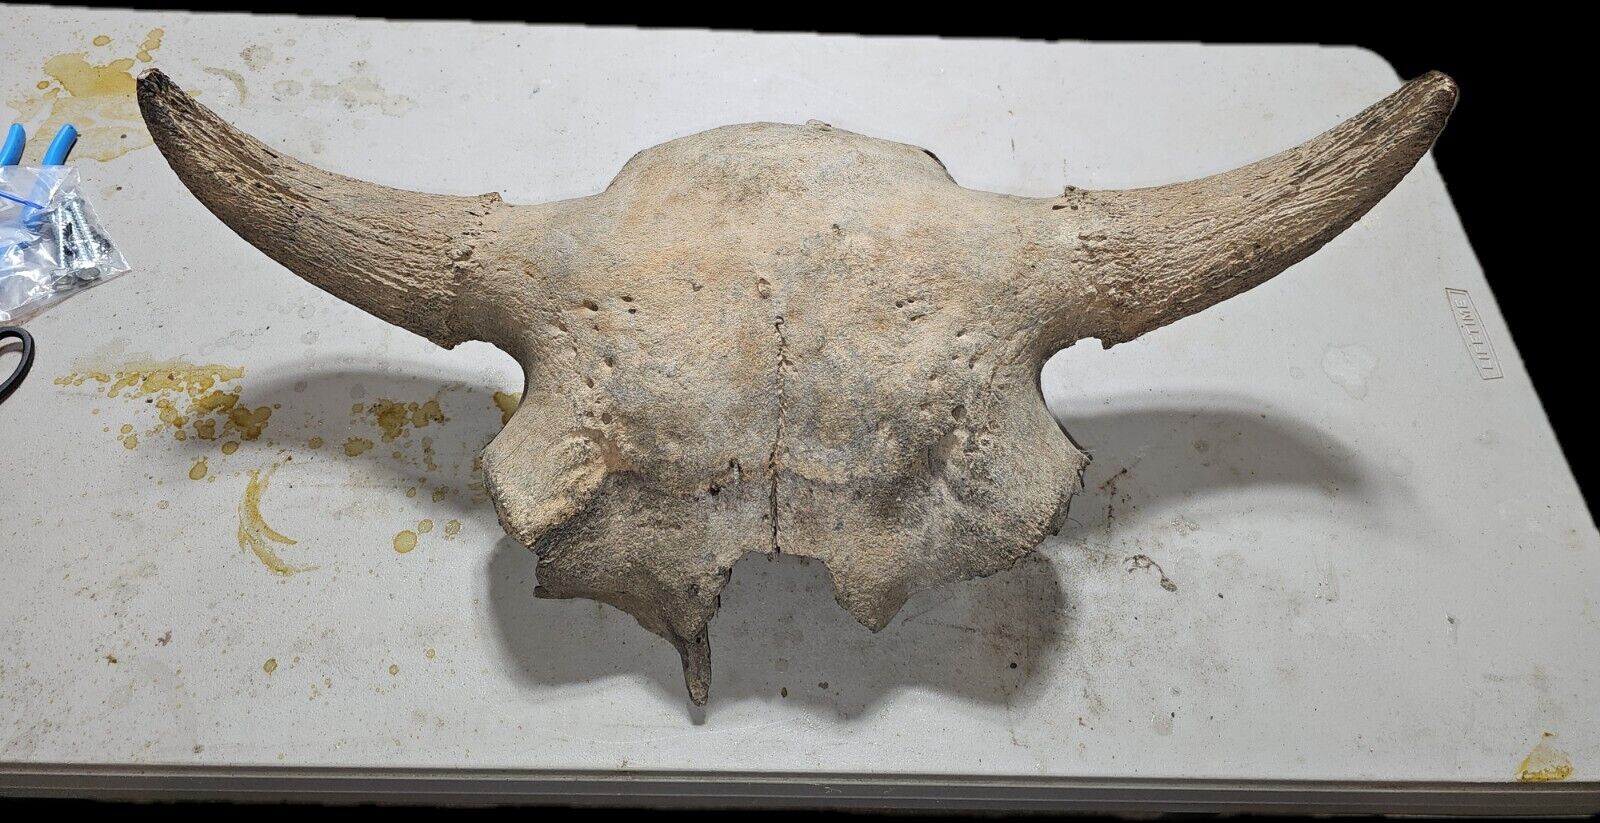 Large Prehistoric BISON Occidentalis (Buffalo) Skull As Seen In My Blog.